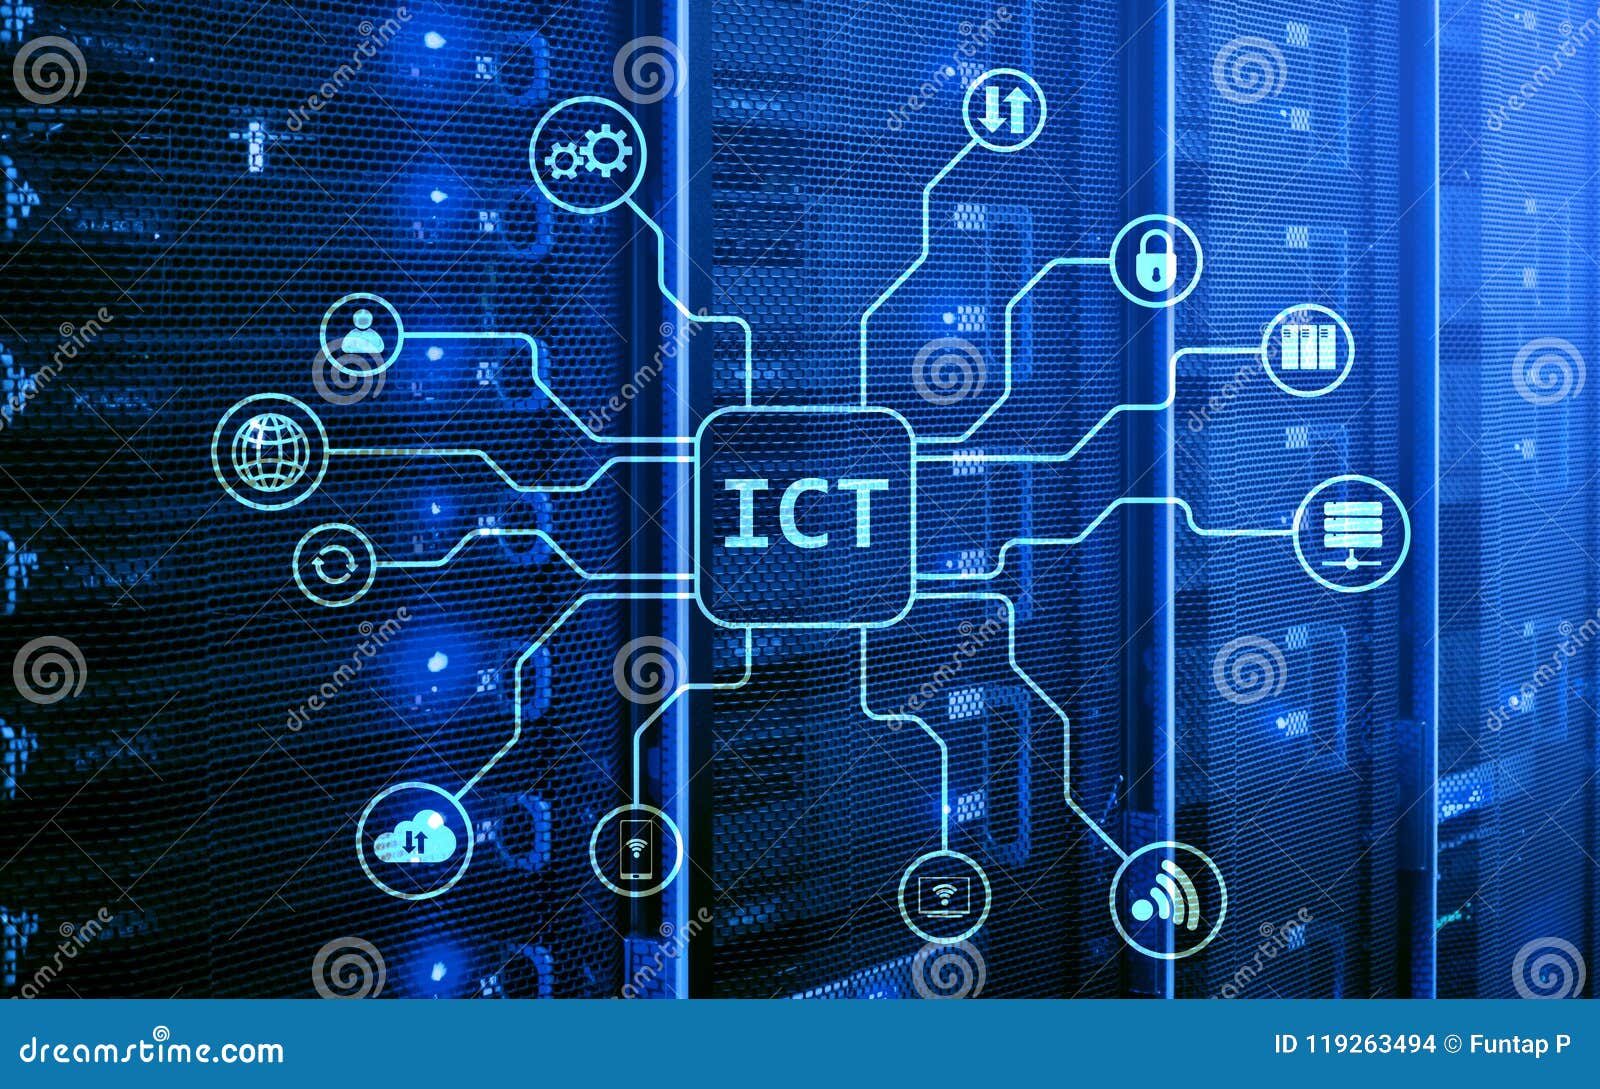 ict - information and communications technology concept on server room background